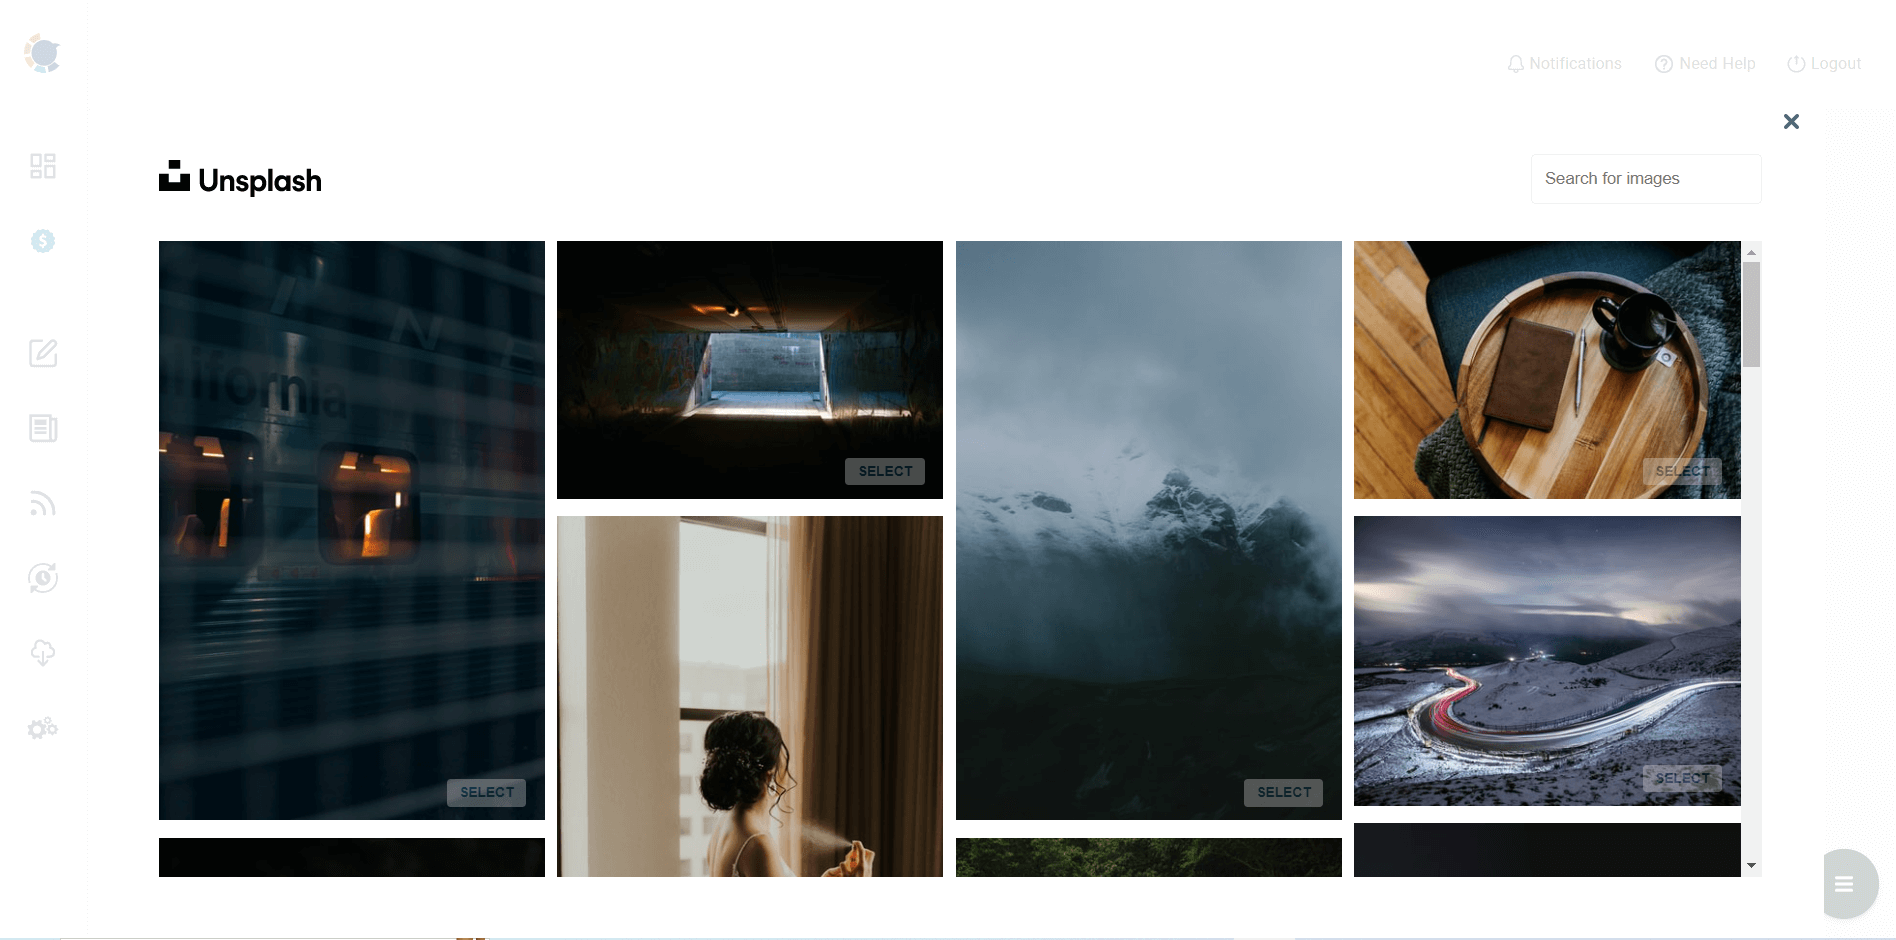 Enjoy quality photos of Unsplash to create your Instagram carousel posts.